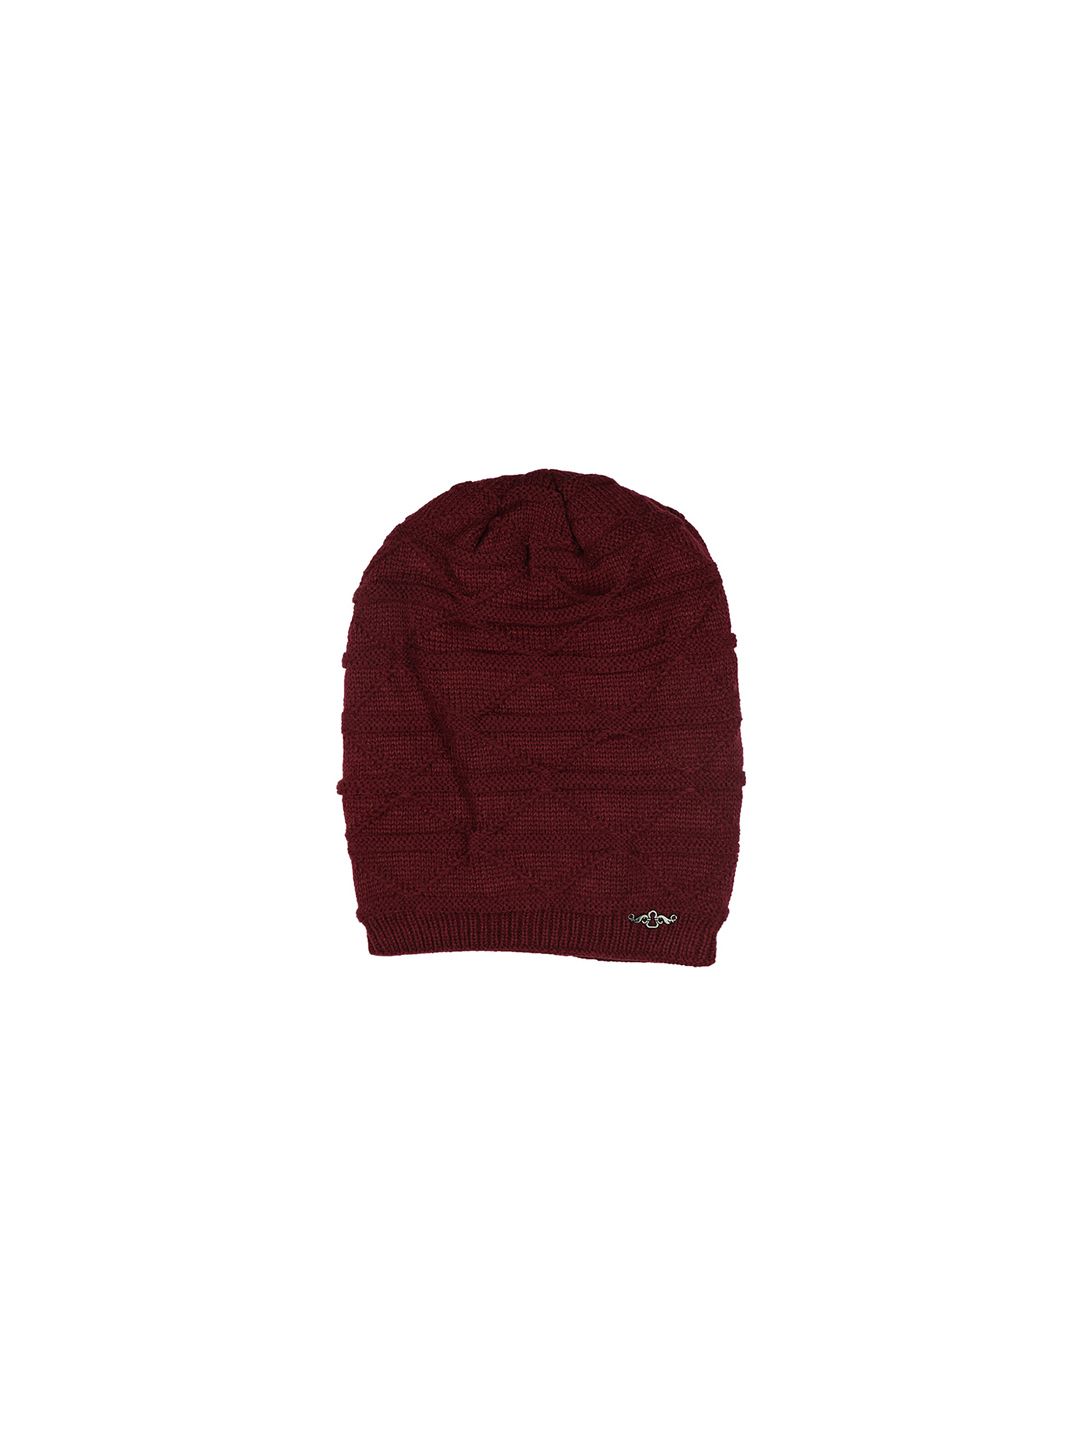 iSWEVEN Unisex Maroon Embroidered Beanie Price in India